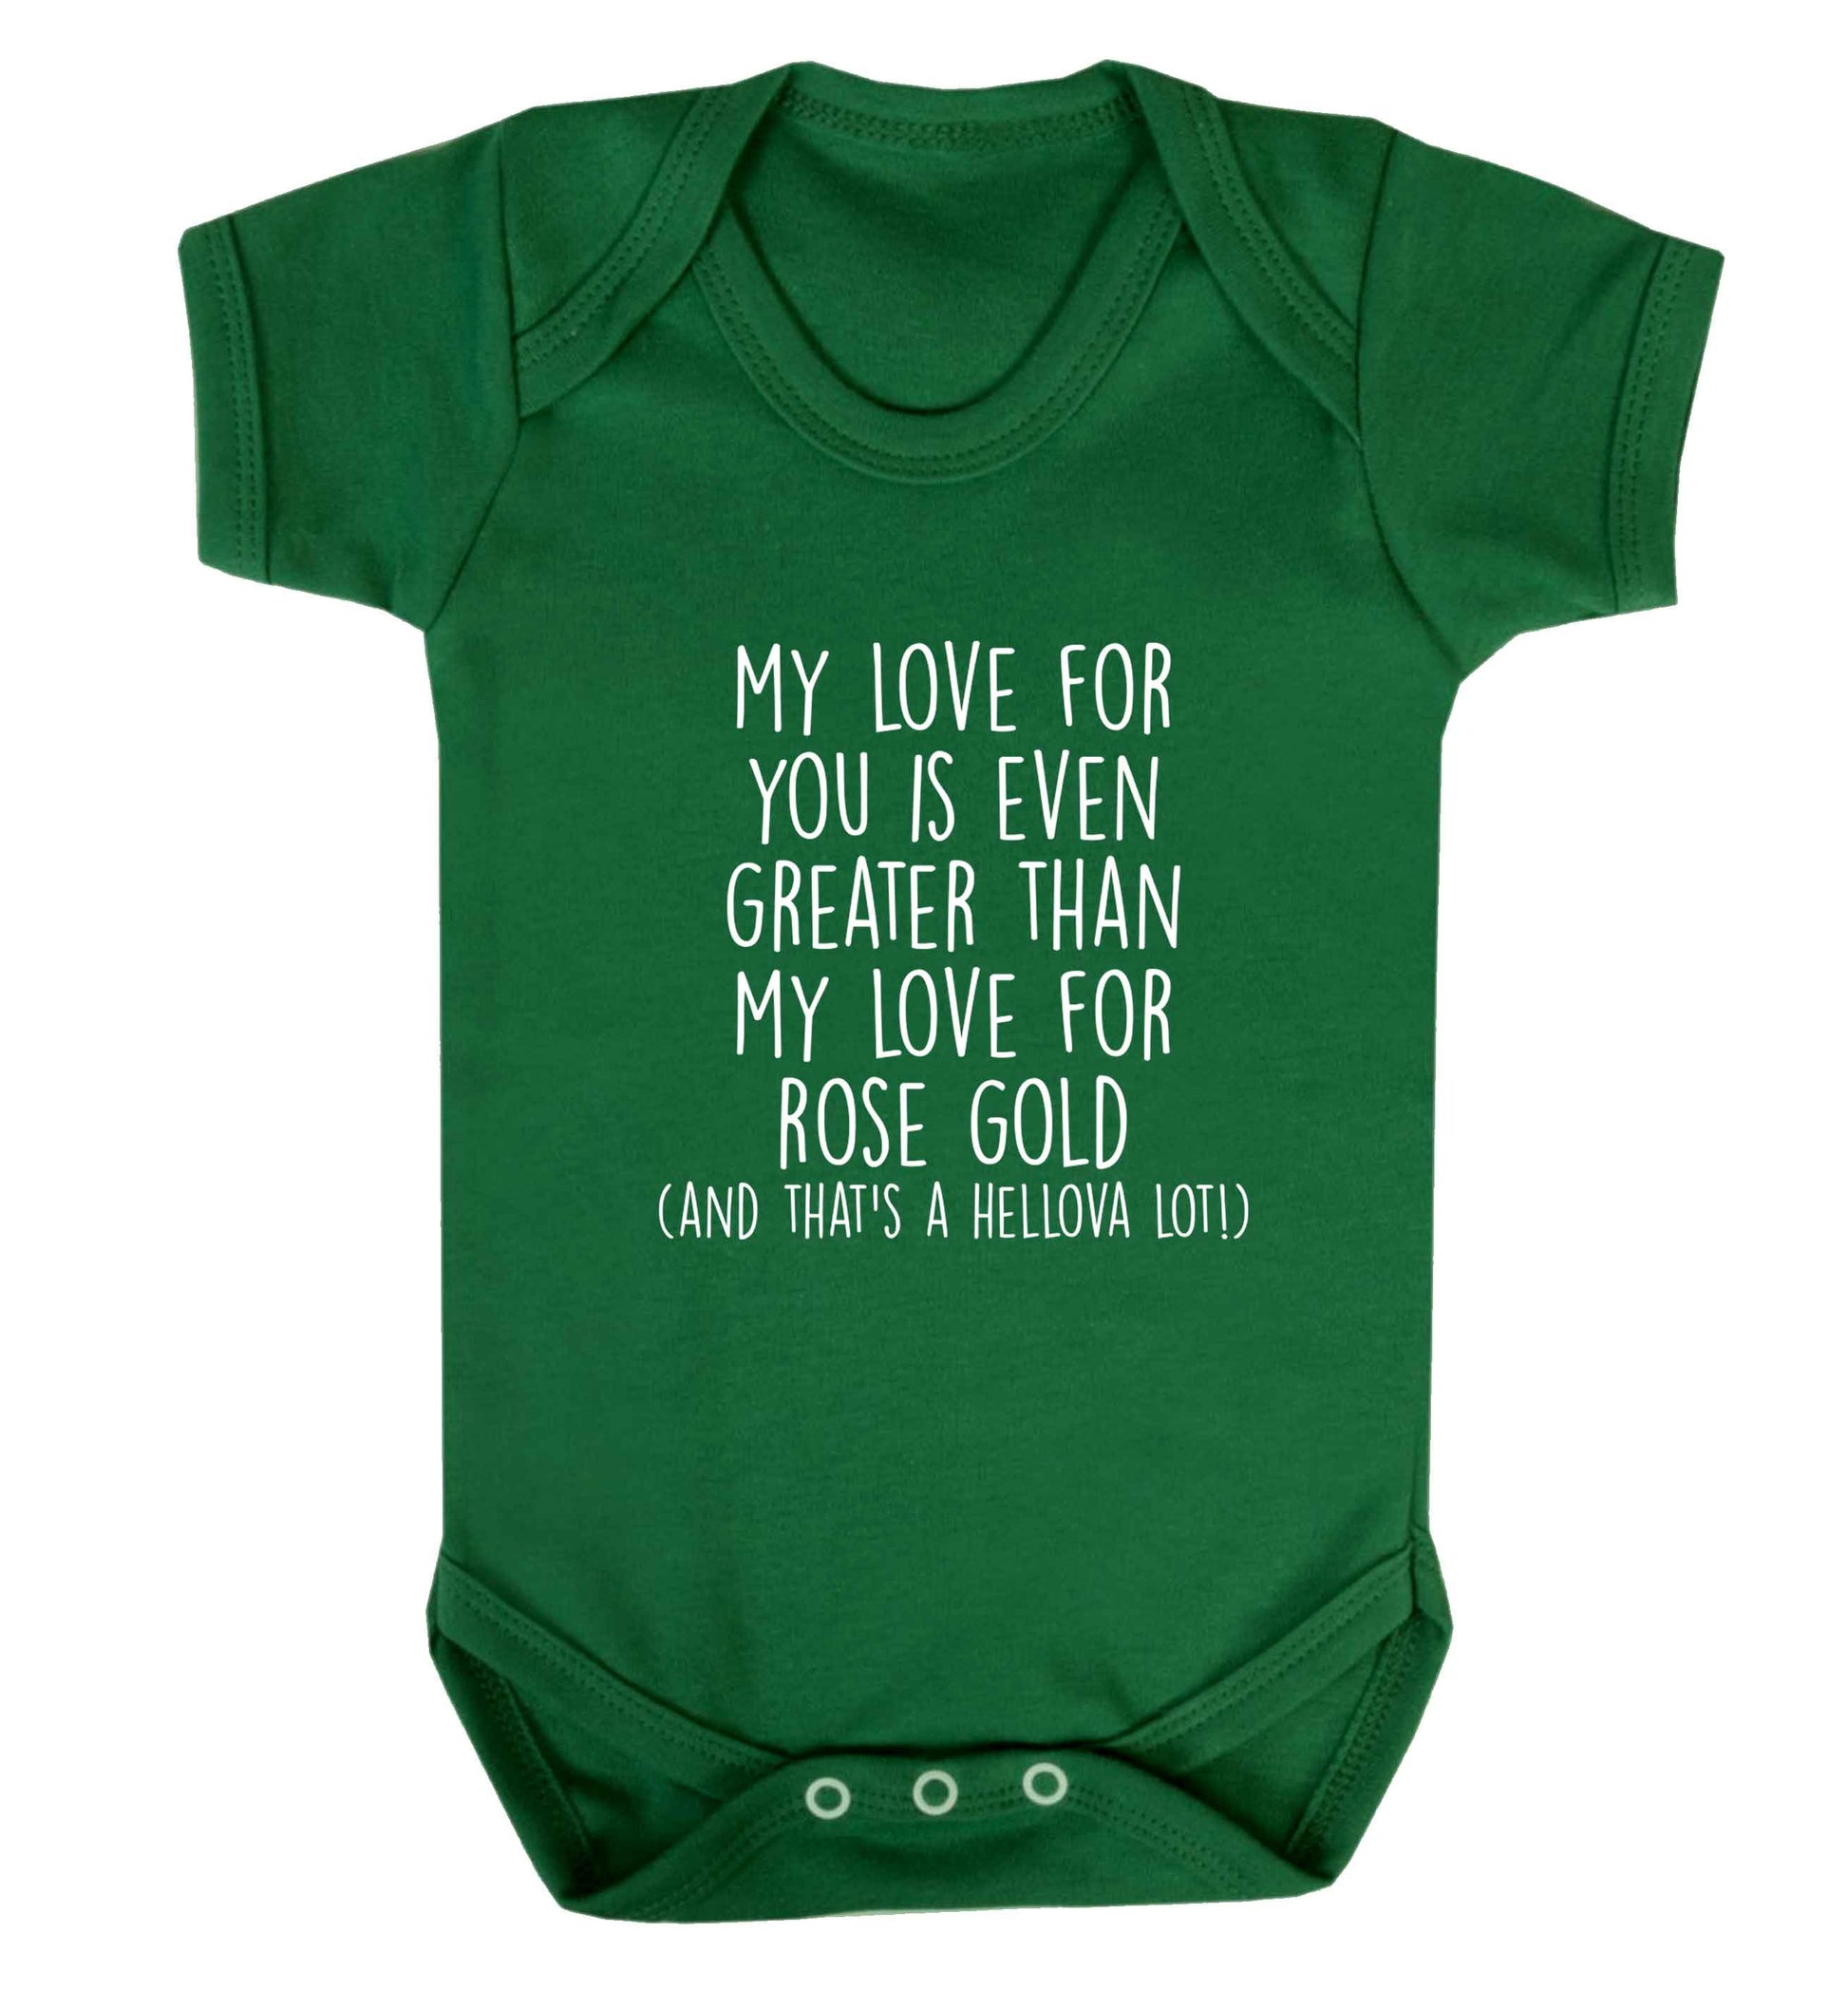 My love for you is even greater than my love for rose gold (and that's a hellova lot) baby vest green 18-24 months